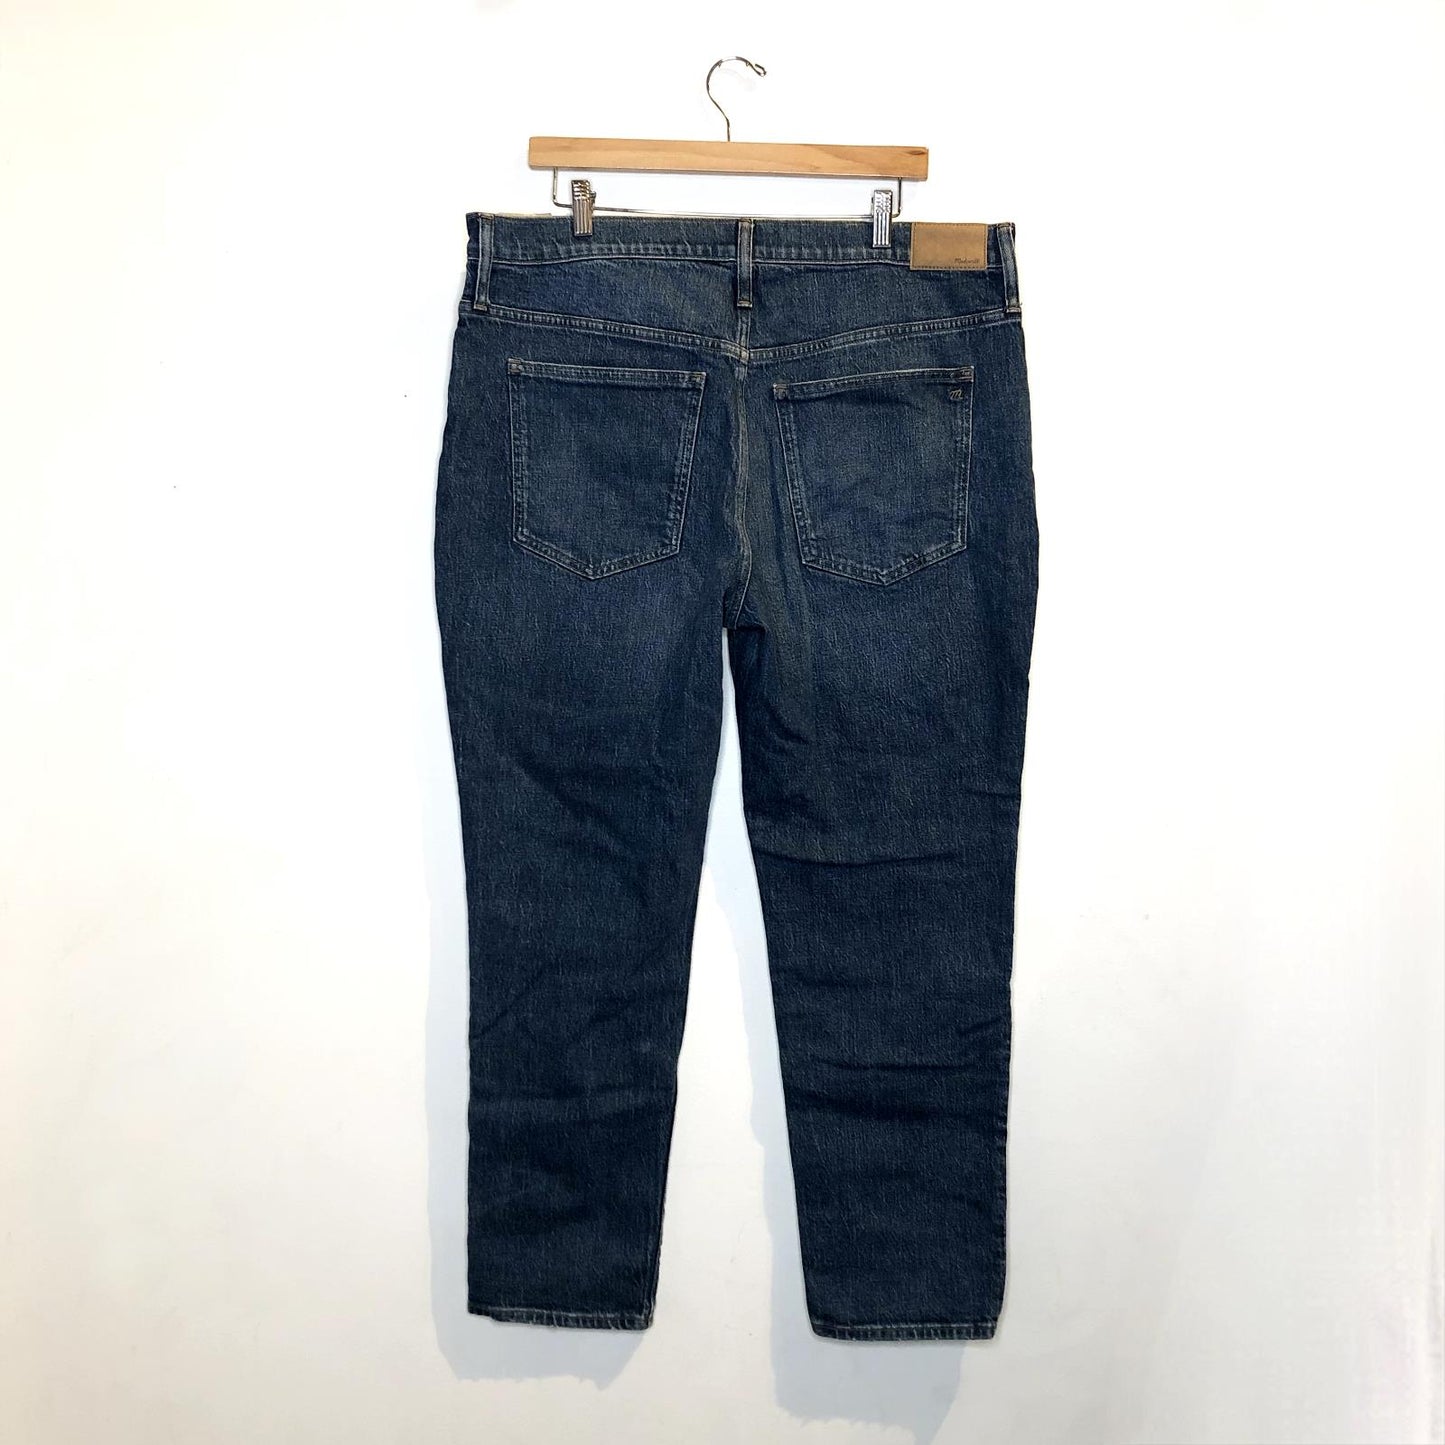 33 - Madewell NEW $128 The Perfect Vintage Jeans Womens 0530JF